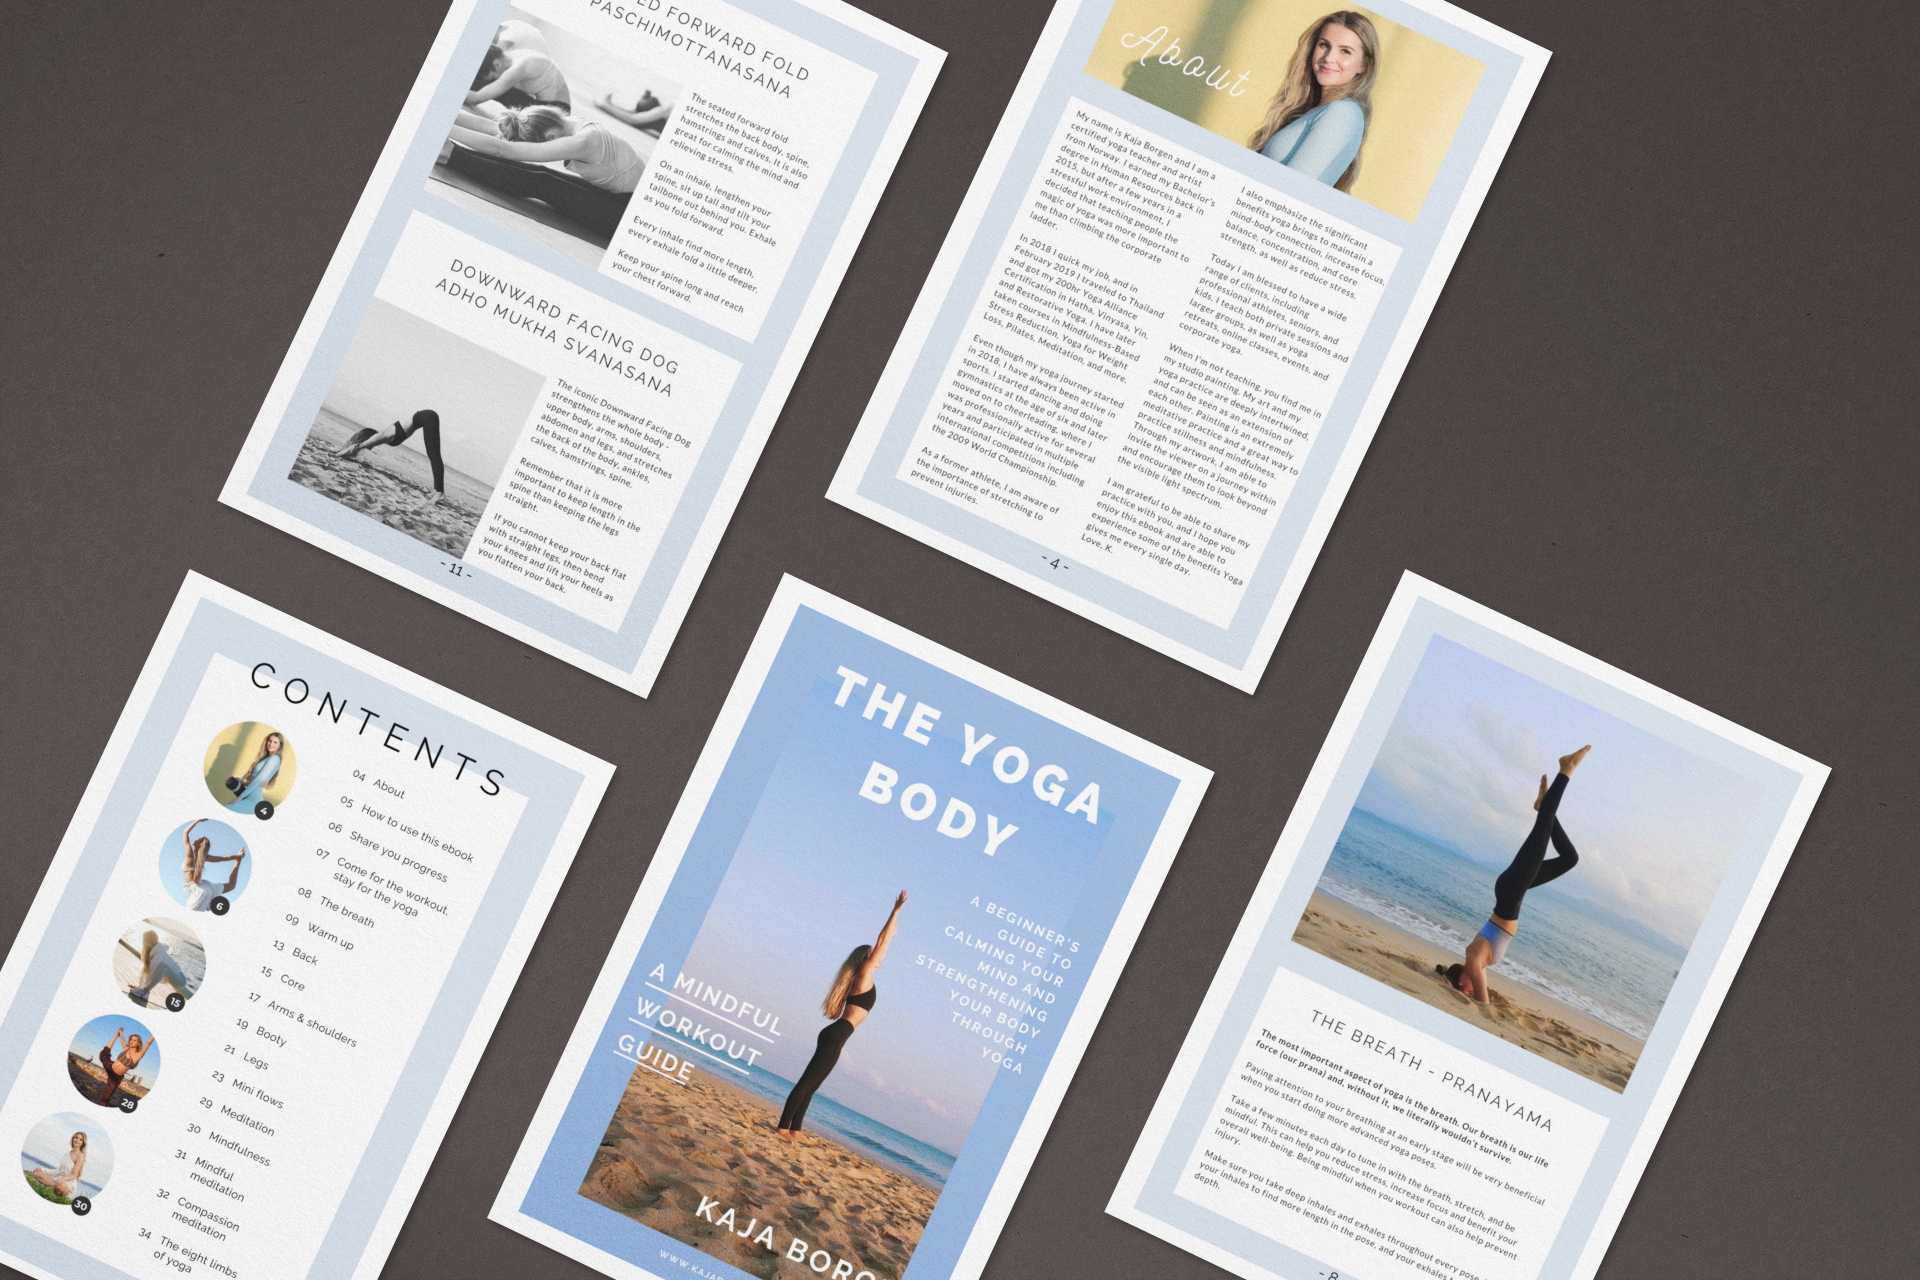 The Yoga Body by Kaja Borgen is a beginner's guide to calming your mind and strengthening your body through yoga. Get lean and strong, mentally and physically, with The Yoga Body workout guide.